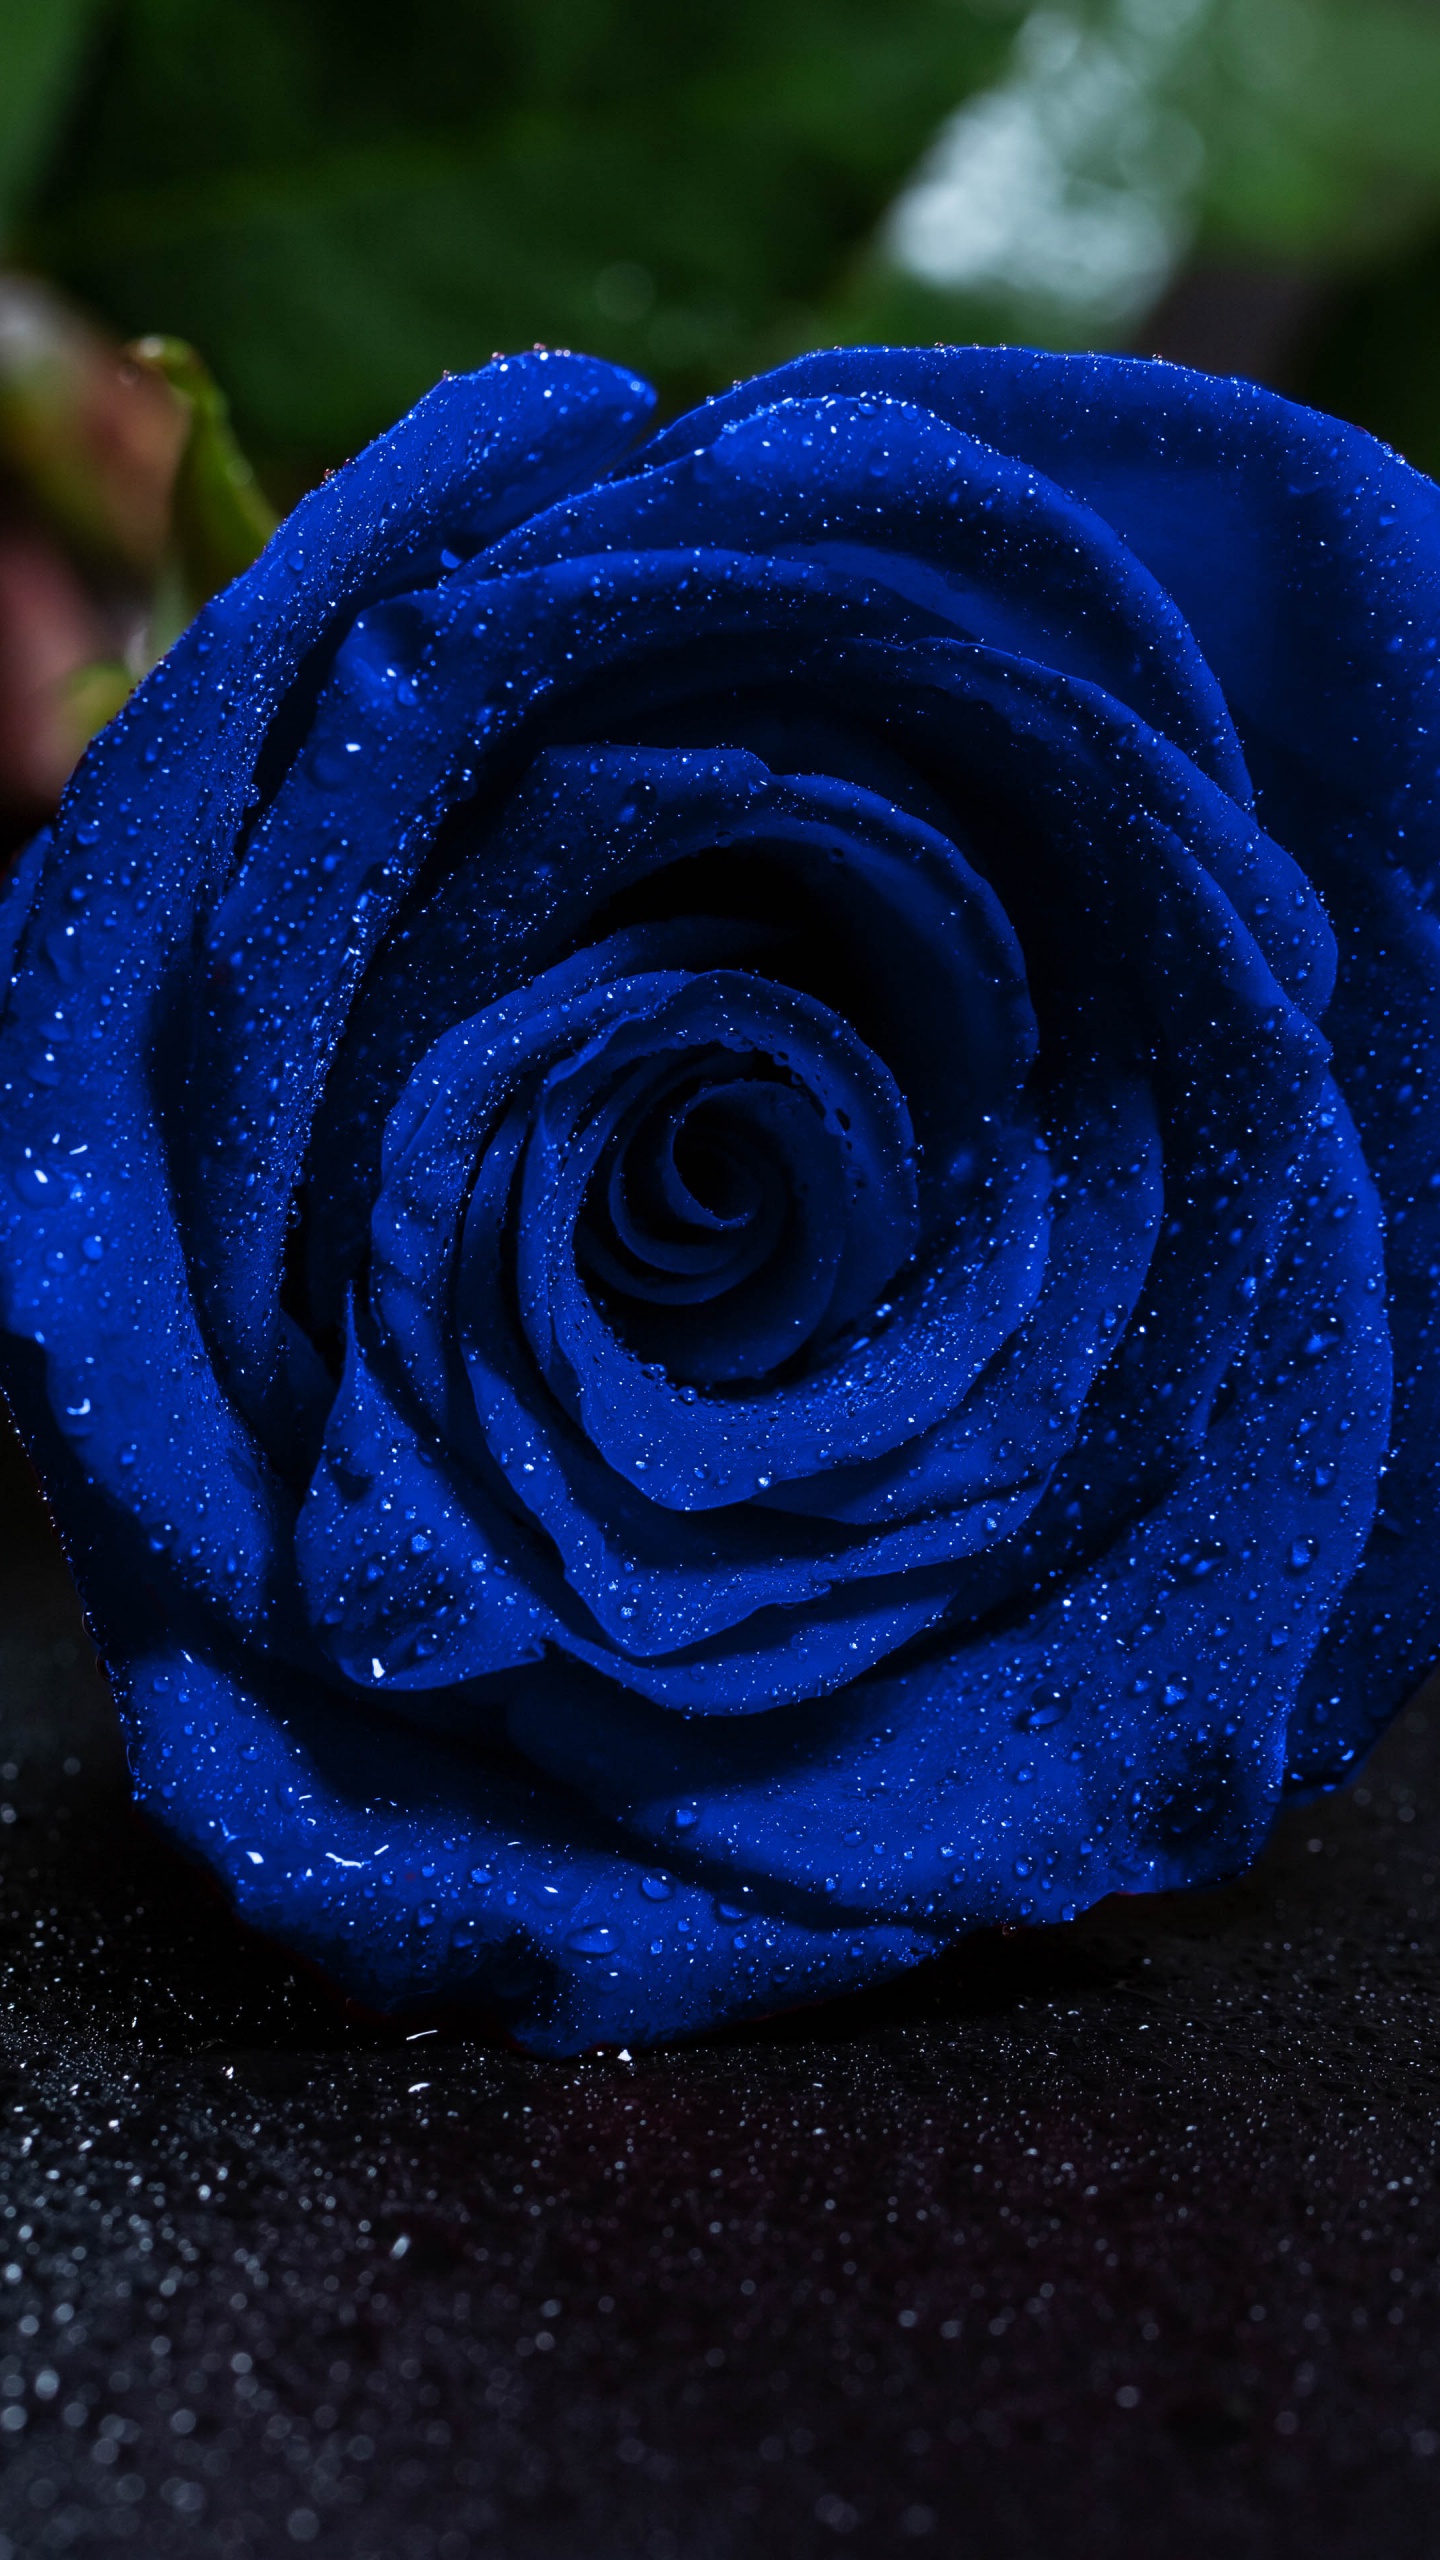 Blue Rose on Black Surface. Wallpaper in 1440x2560 Resolution